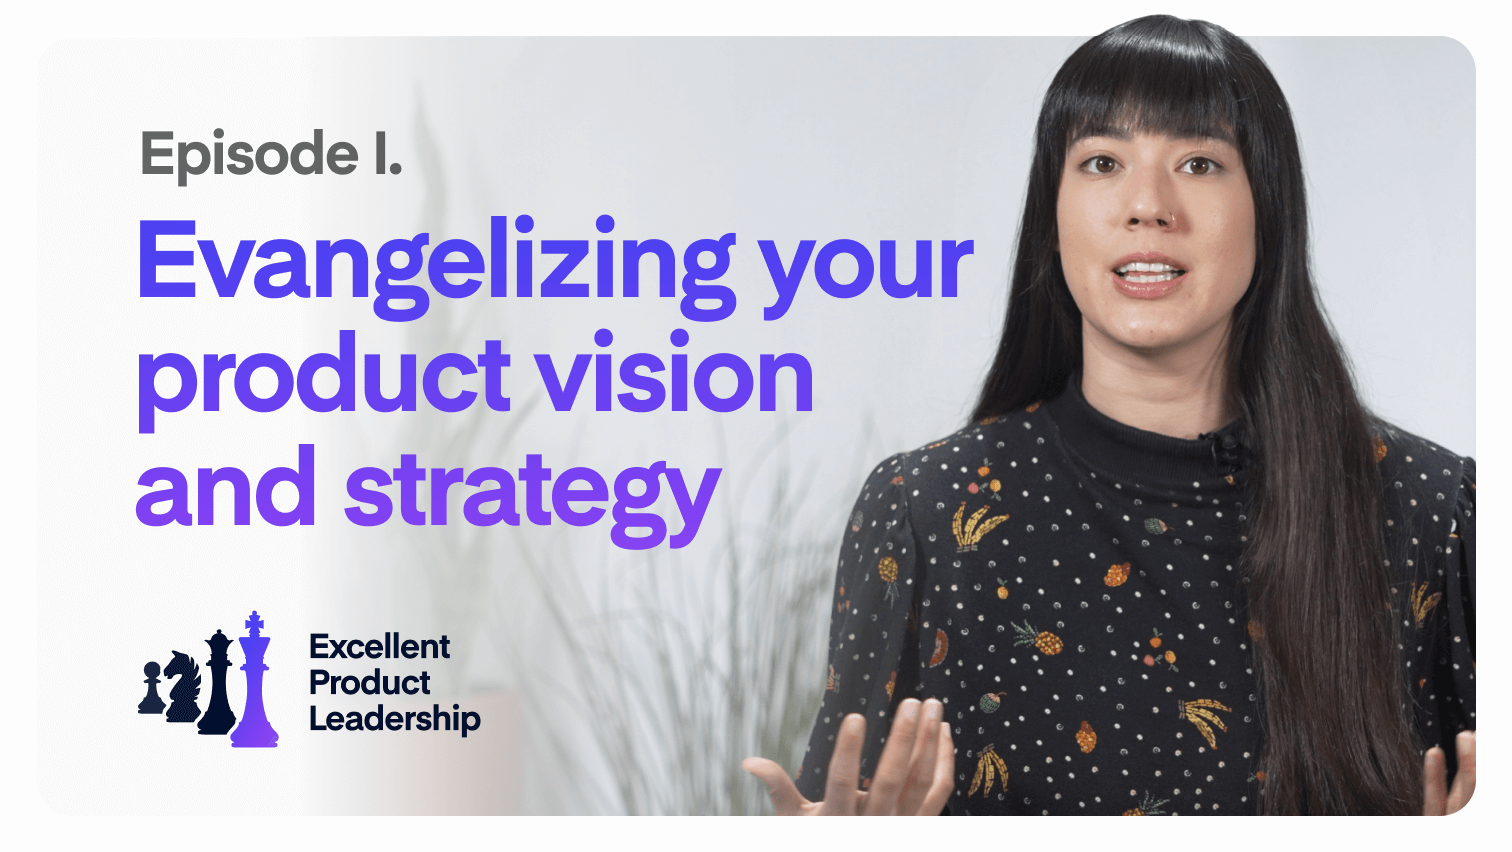 [VIDEO] How to unite your product team around shared objectives